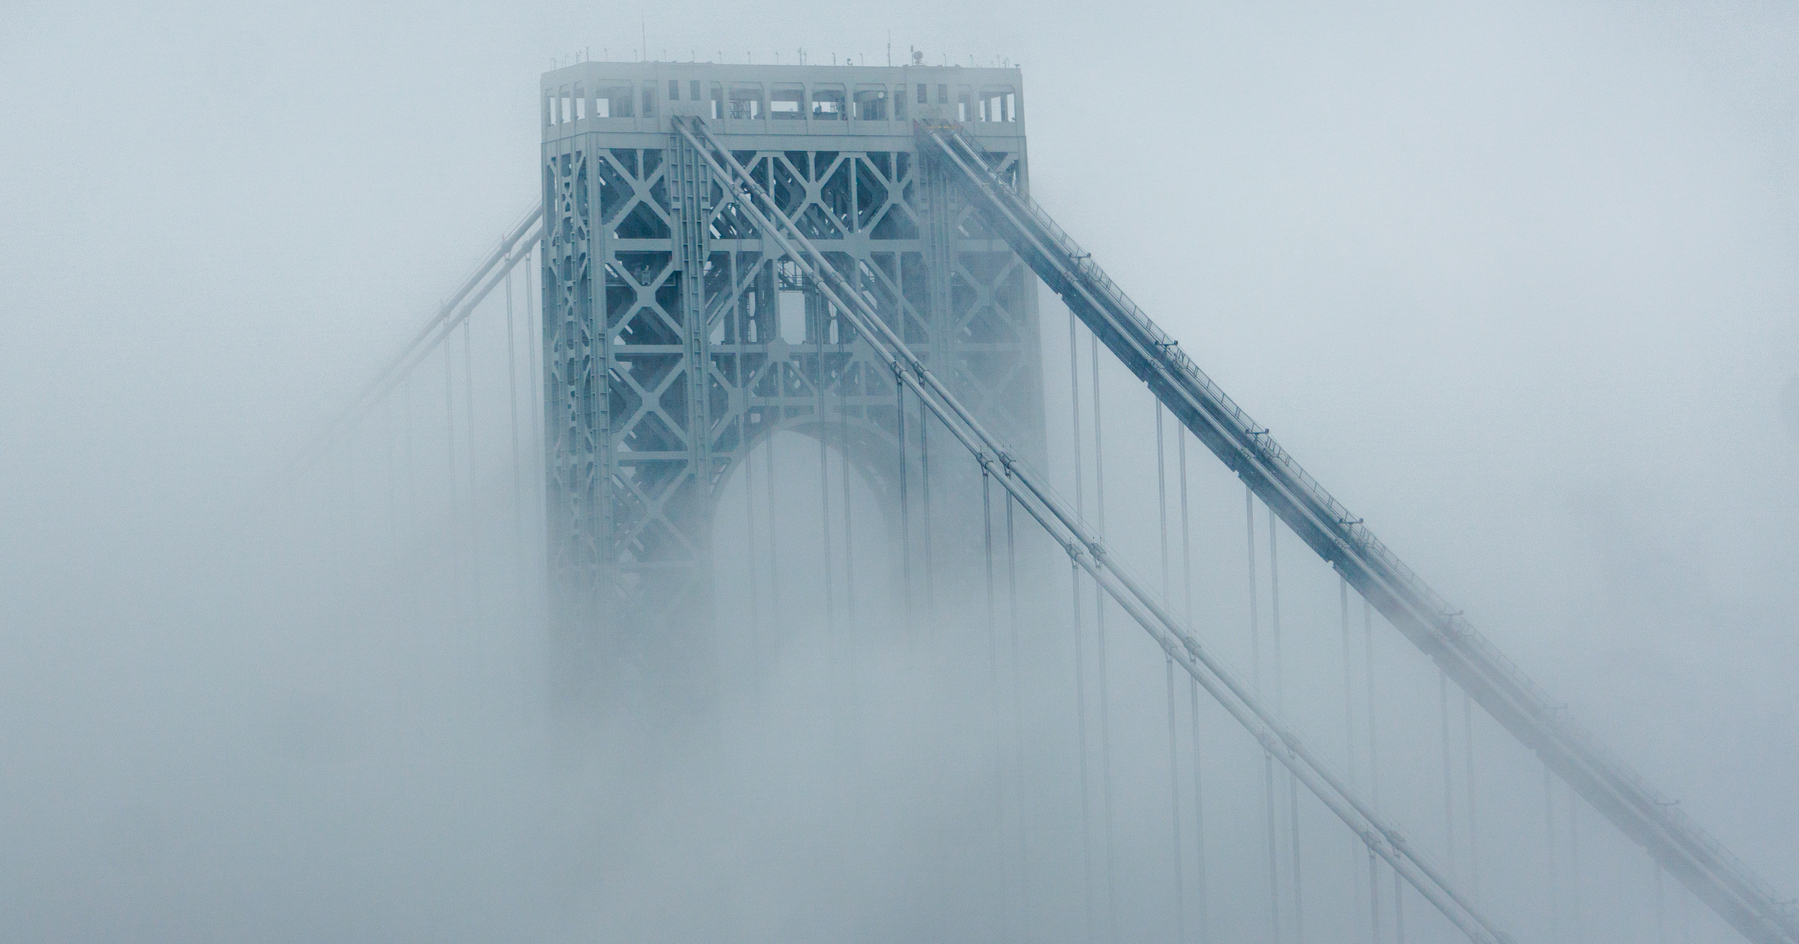 A main pillar of a hanging bridge, the George Washington Bridge, immersed in the morning fog. Only the top shows, the rest is hidden behind the vapor